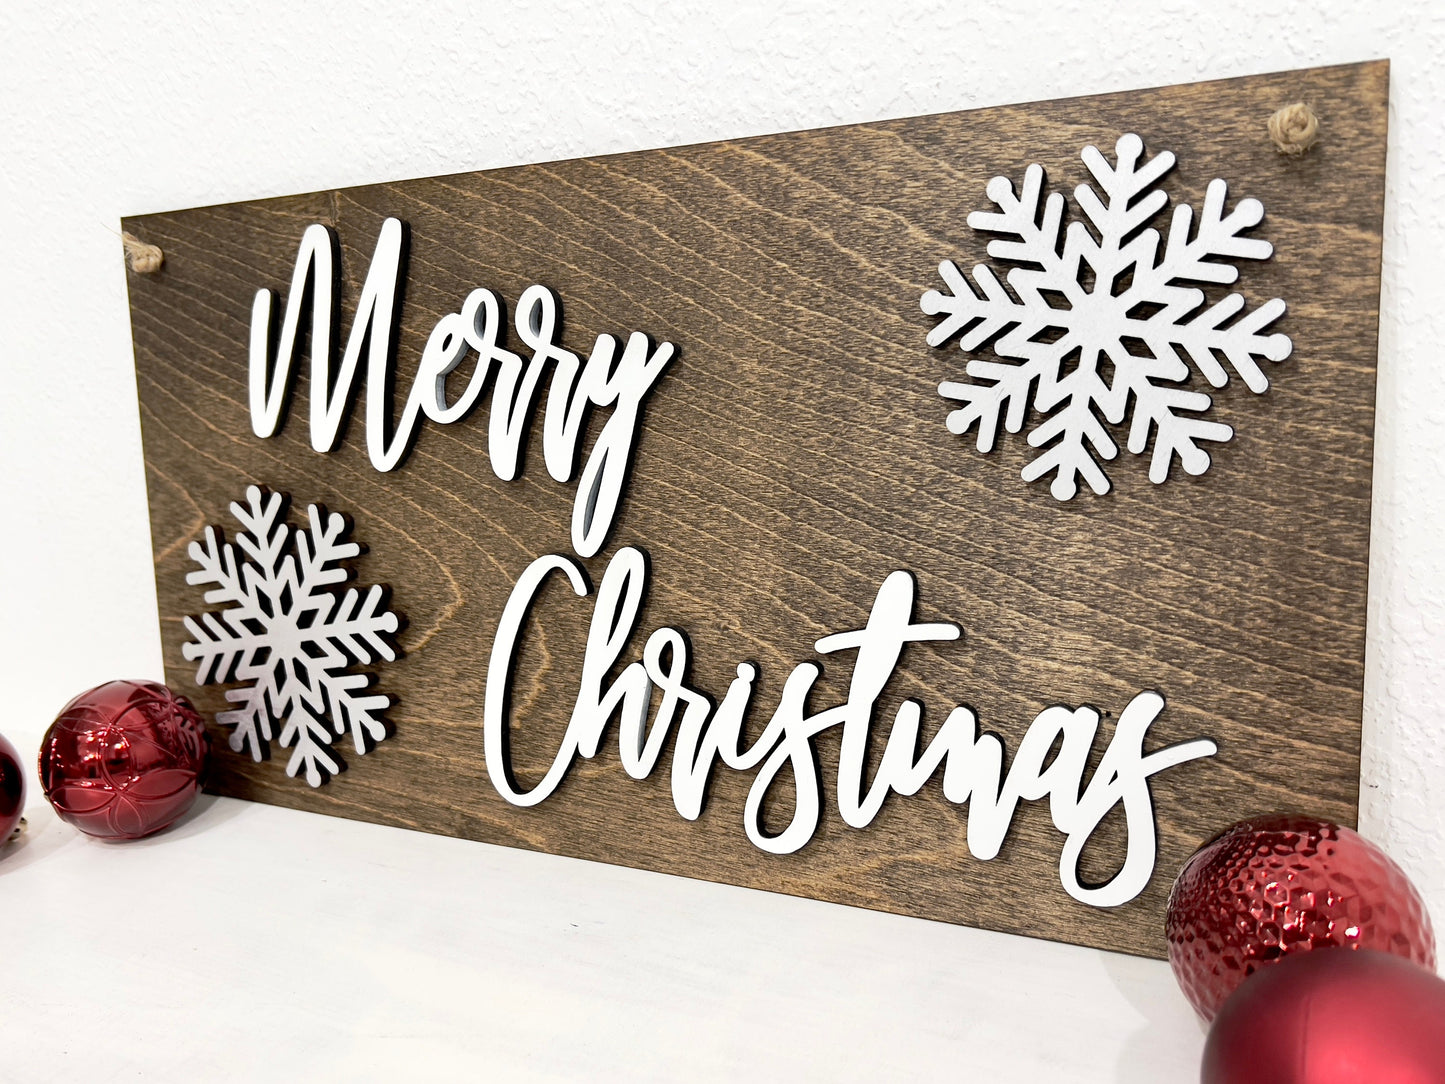 Merry Christmas sign kit, DIY holiday crafts, snowflake sign making supplies, kids craft project ideas, Christmas paint party sign bundle